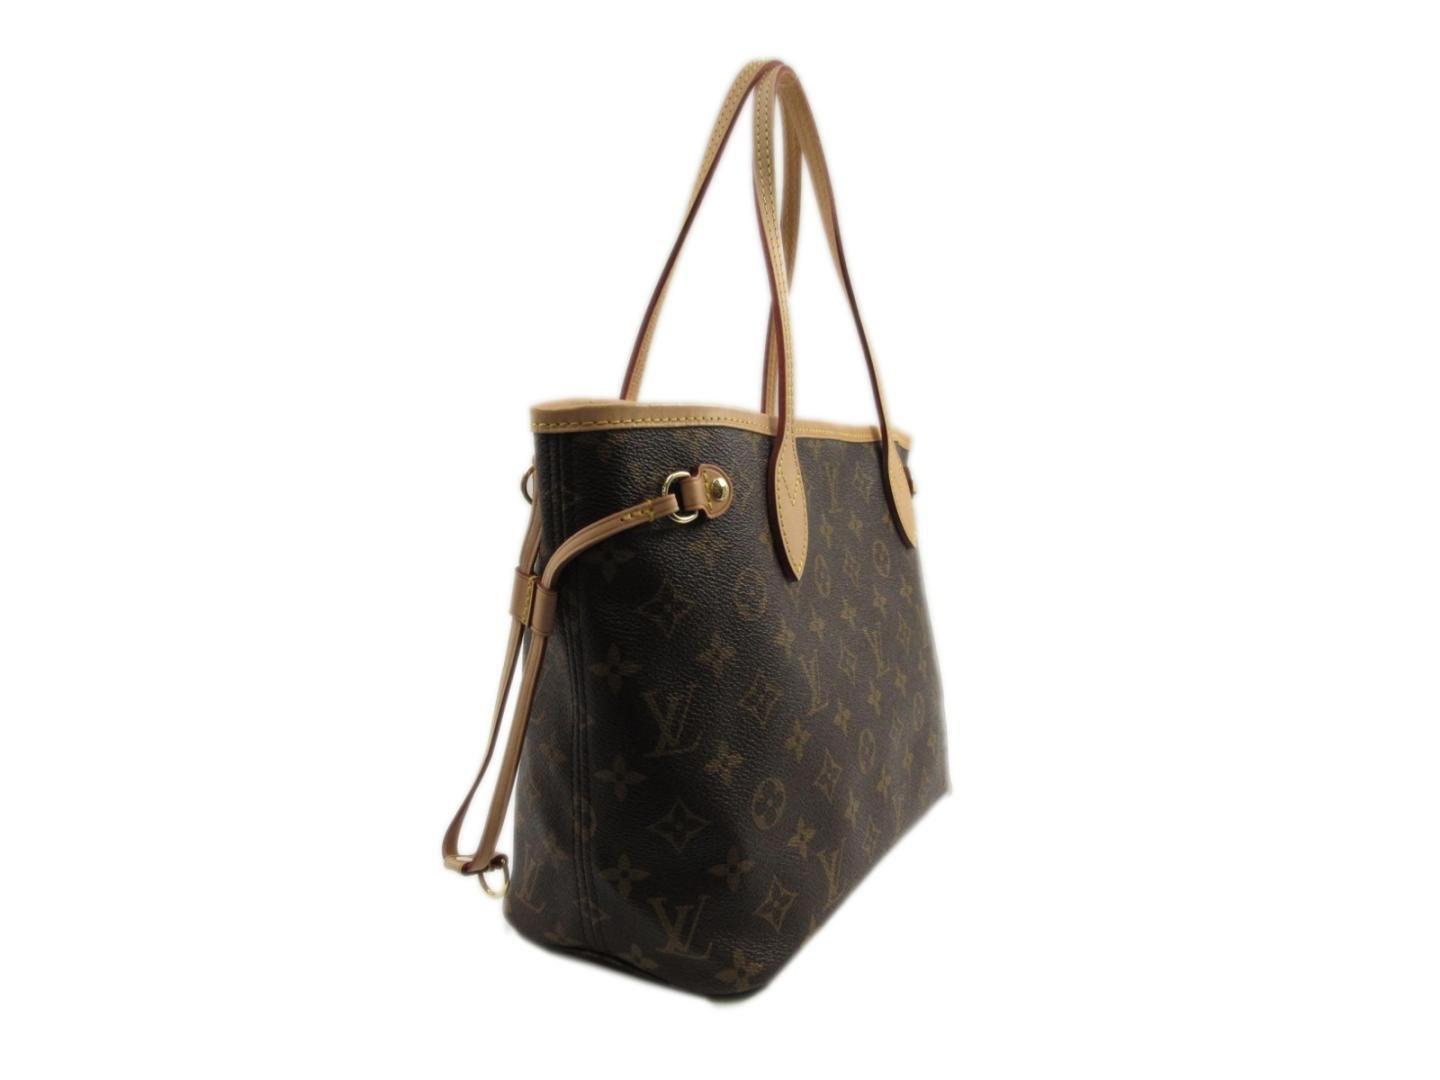 Louis Vuitton Neverfull Pm Shoulder Tote Bag Monogram Canvas M41245 in Brown - Lyst